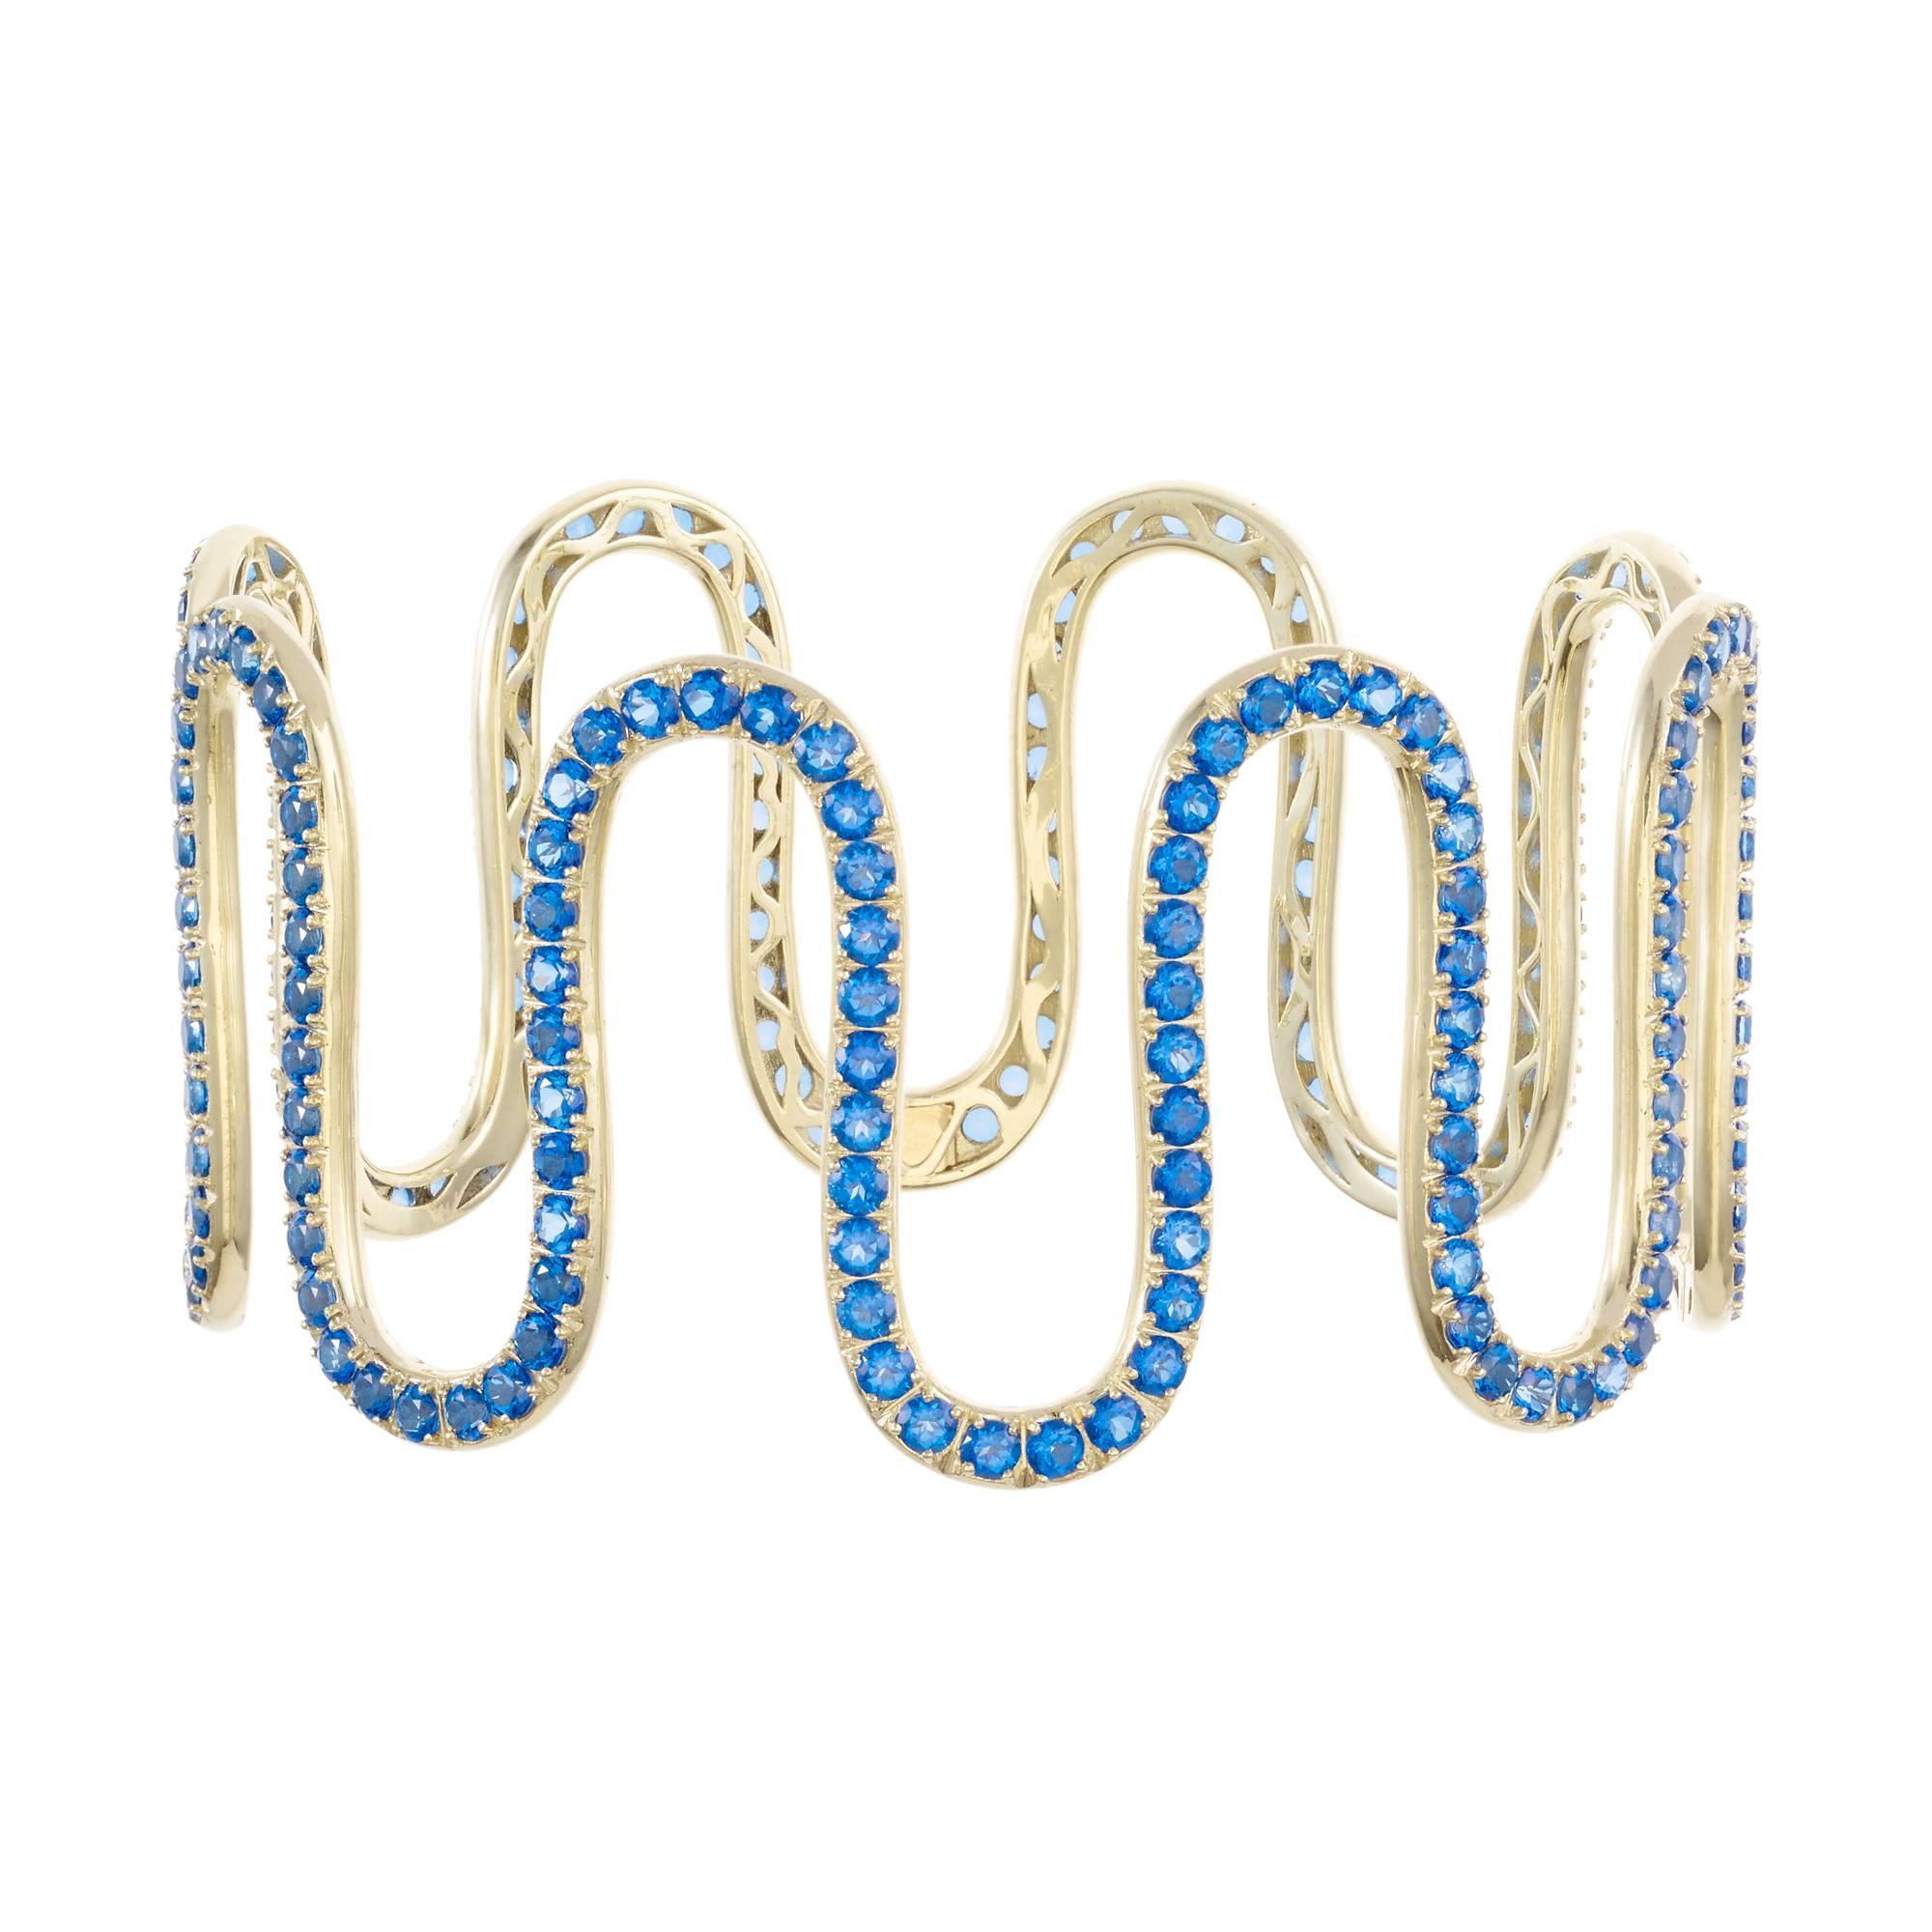 *MADE TO ORDER - 5 WEEK LEAD TIME*

Sabine Getty wiggly choker in 18k yellow gold set with blue topaz.

Topaz: 66.70ct

Yellow, pink, green and blue. Four colours inspired by the Memphis Group, the kookiest of Made in Italy designers, for a